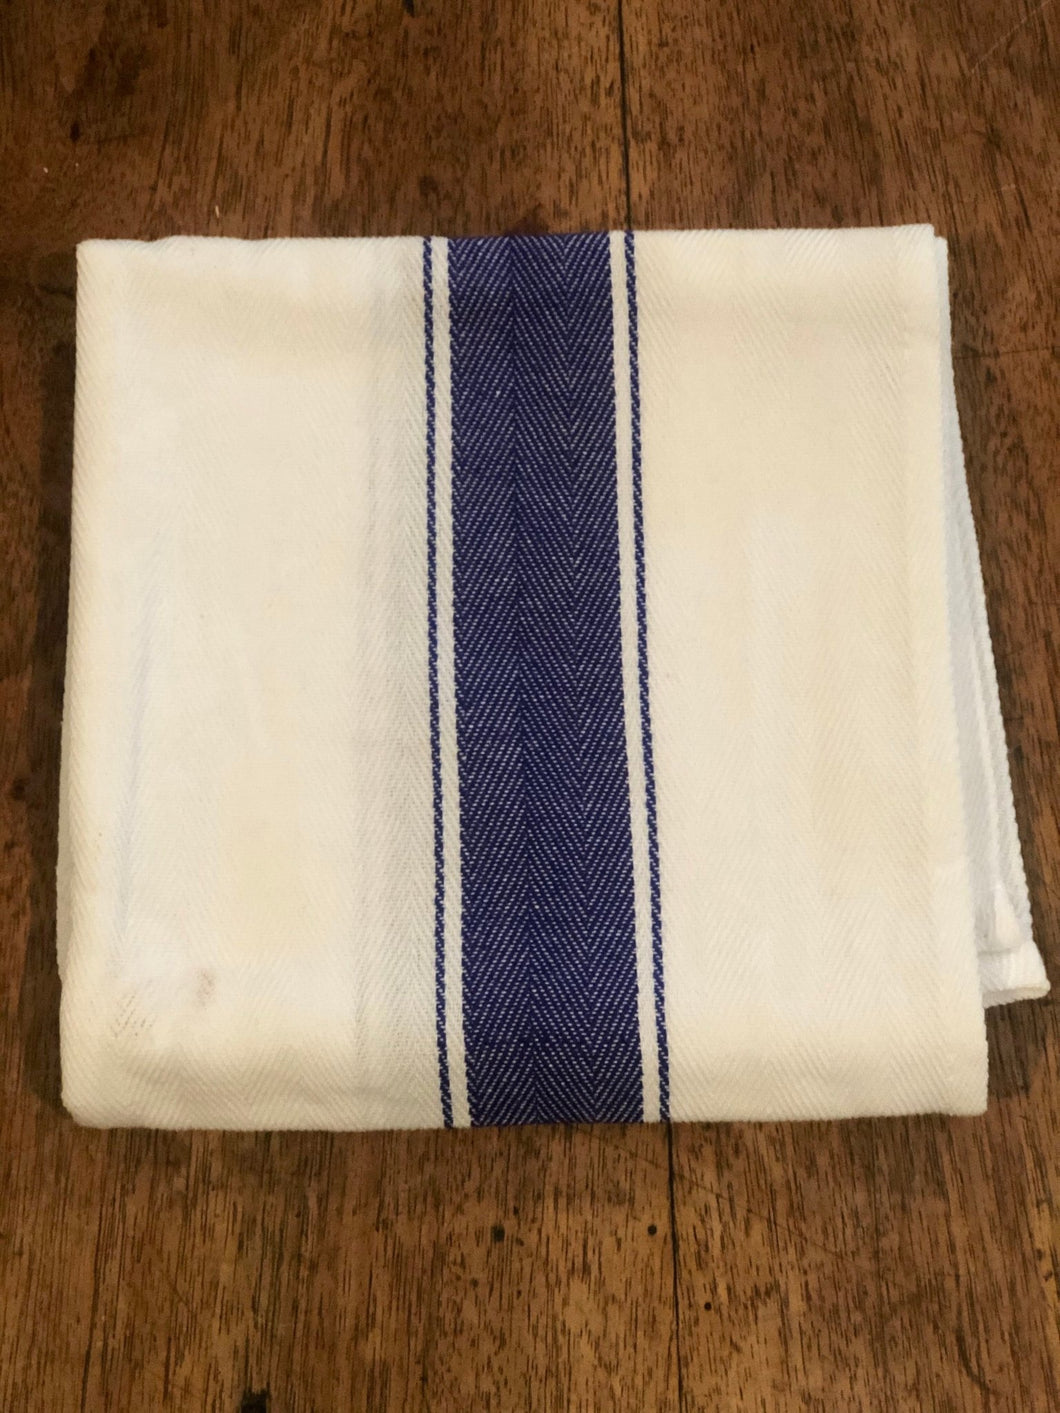 Striped Cotton Kitchen Towel Set (3) - High Weight Cotton Dish Towel Set with Herringbone Weave - The Celtic Farm